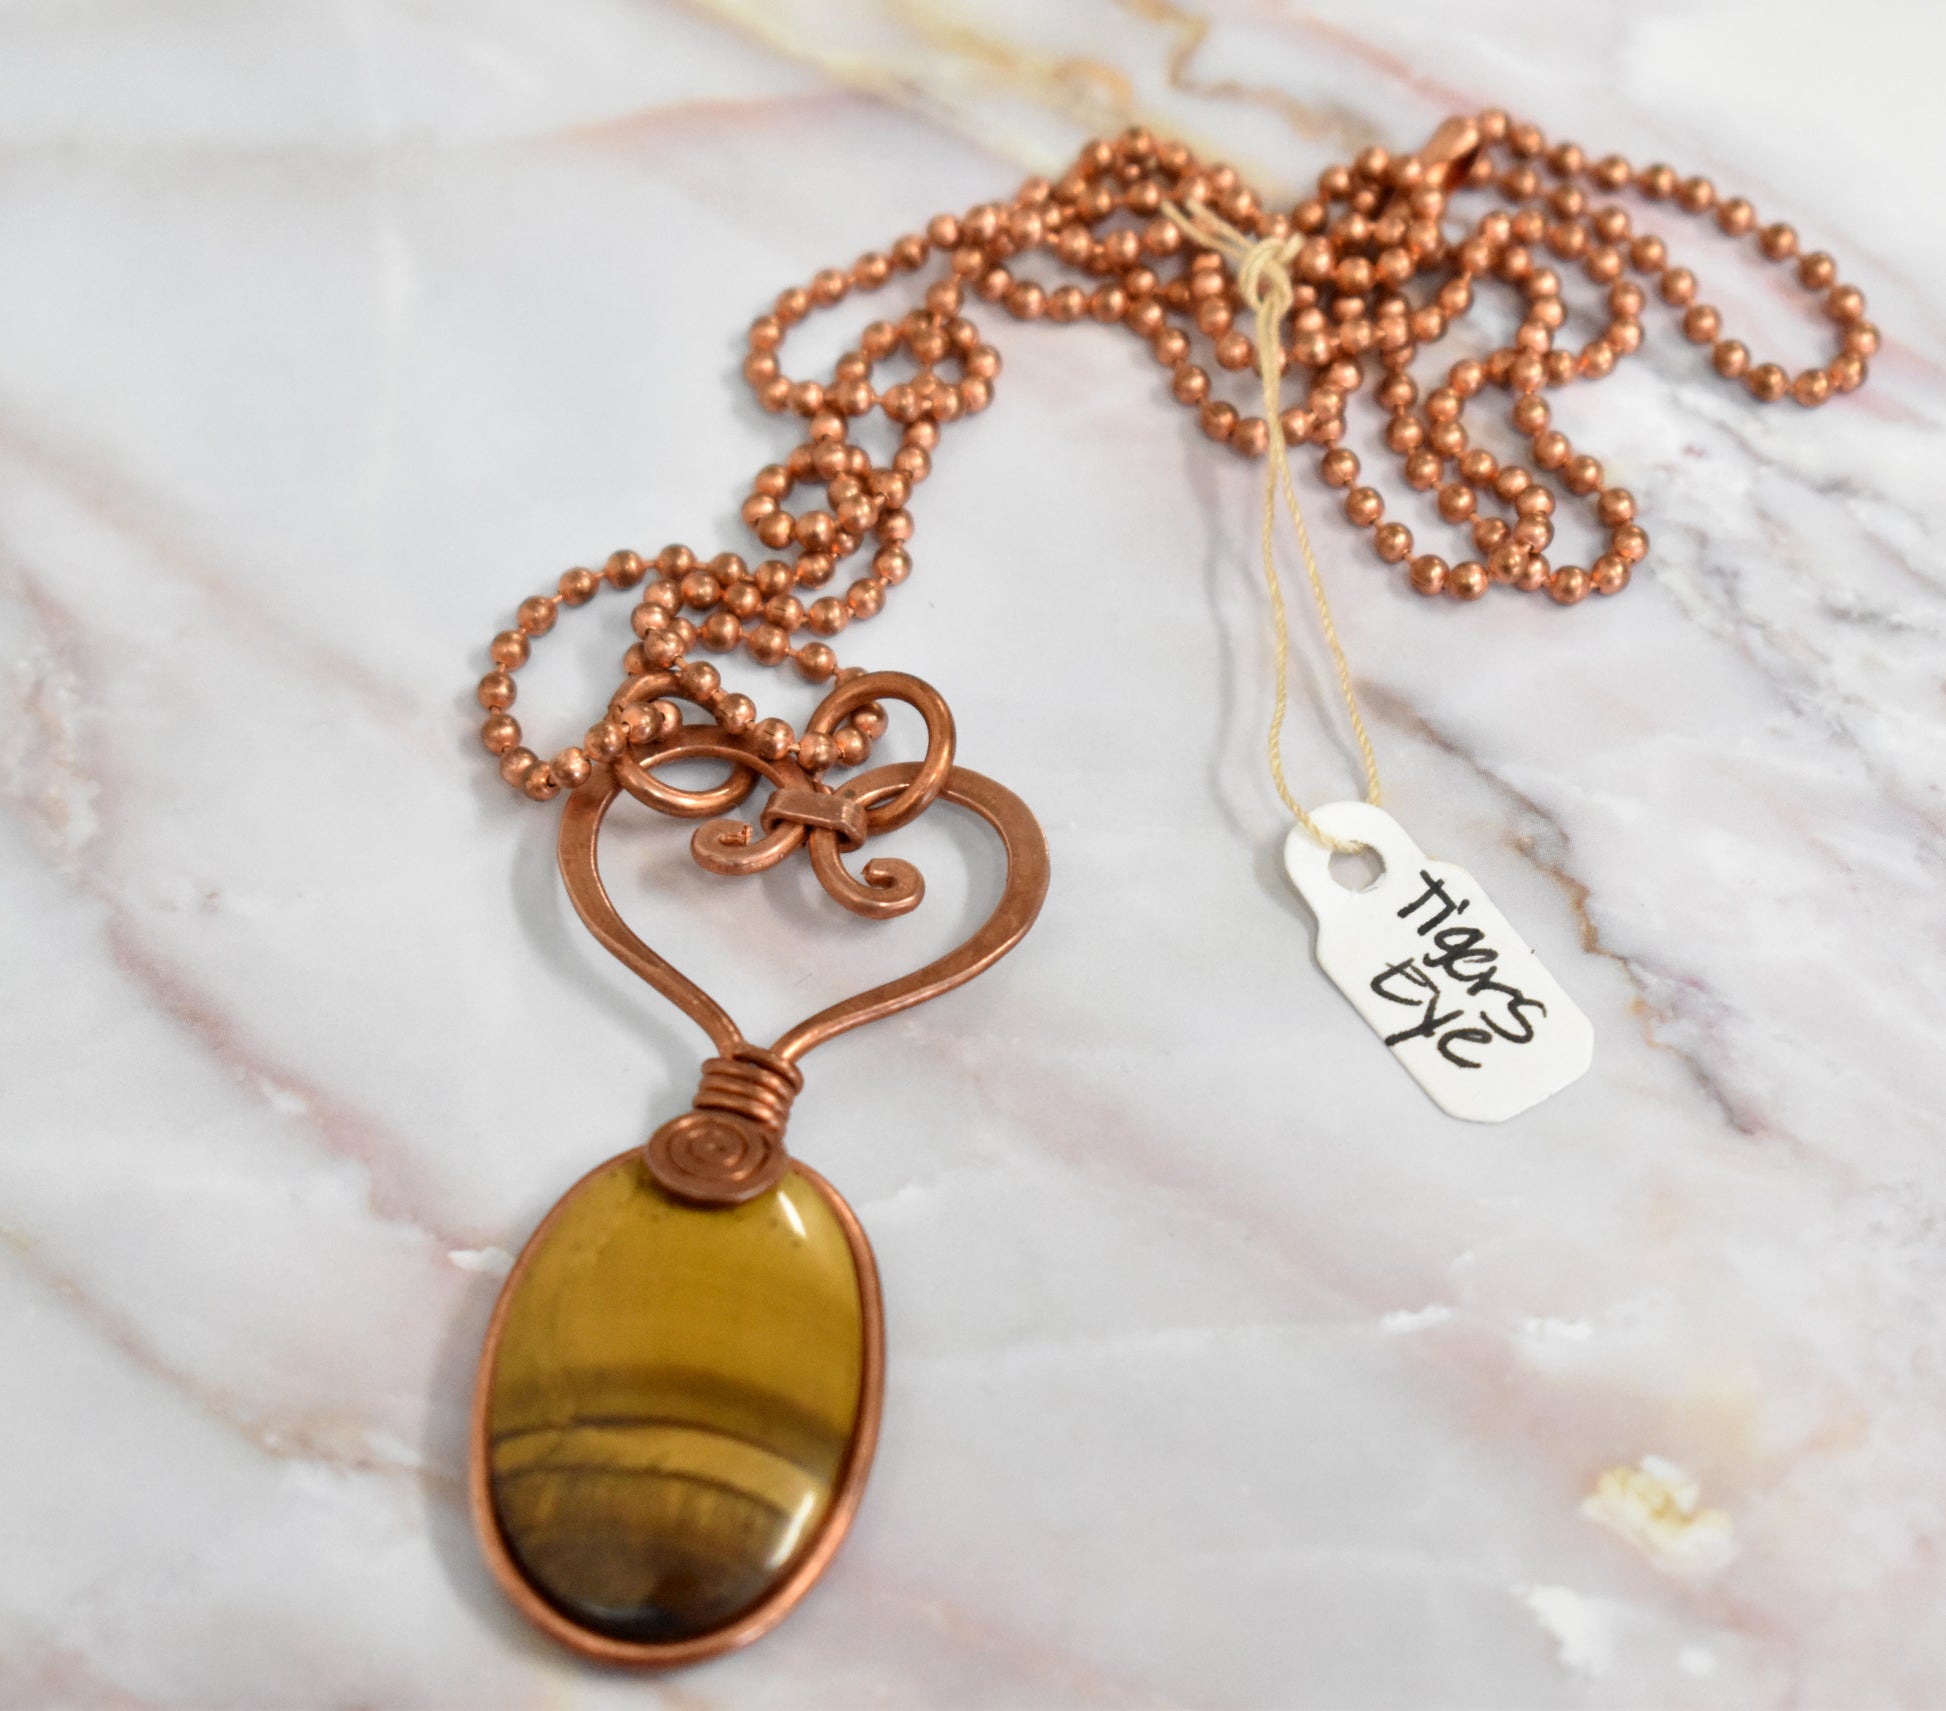 stones-of-transformation - Tigers Eye Necklace with Copper - Stones of Transformation - 